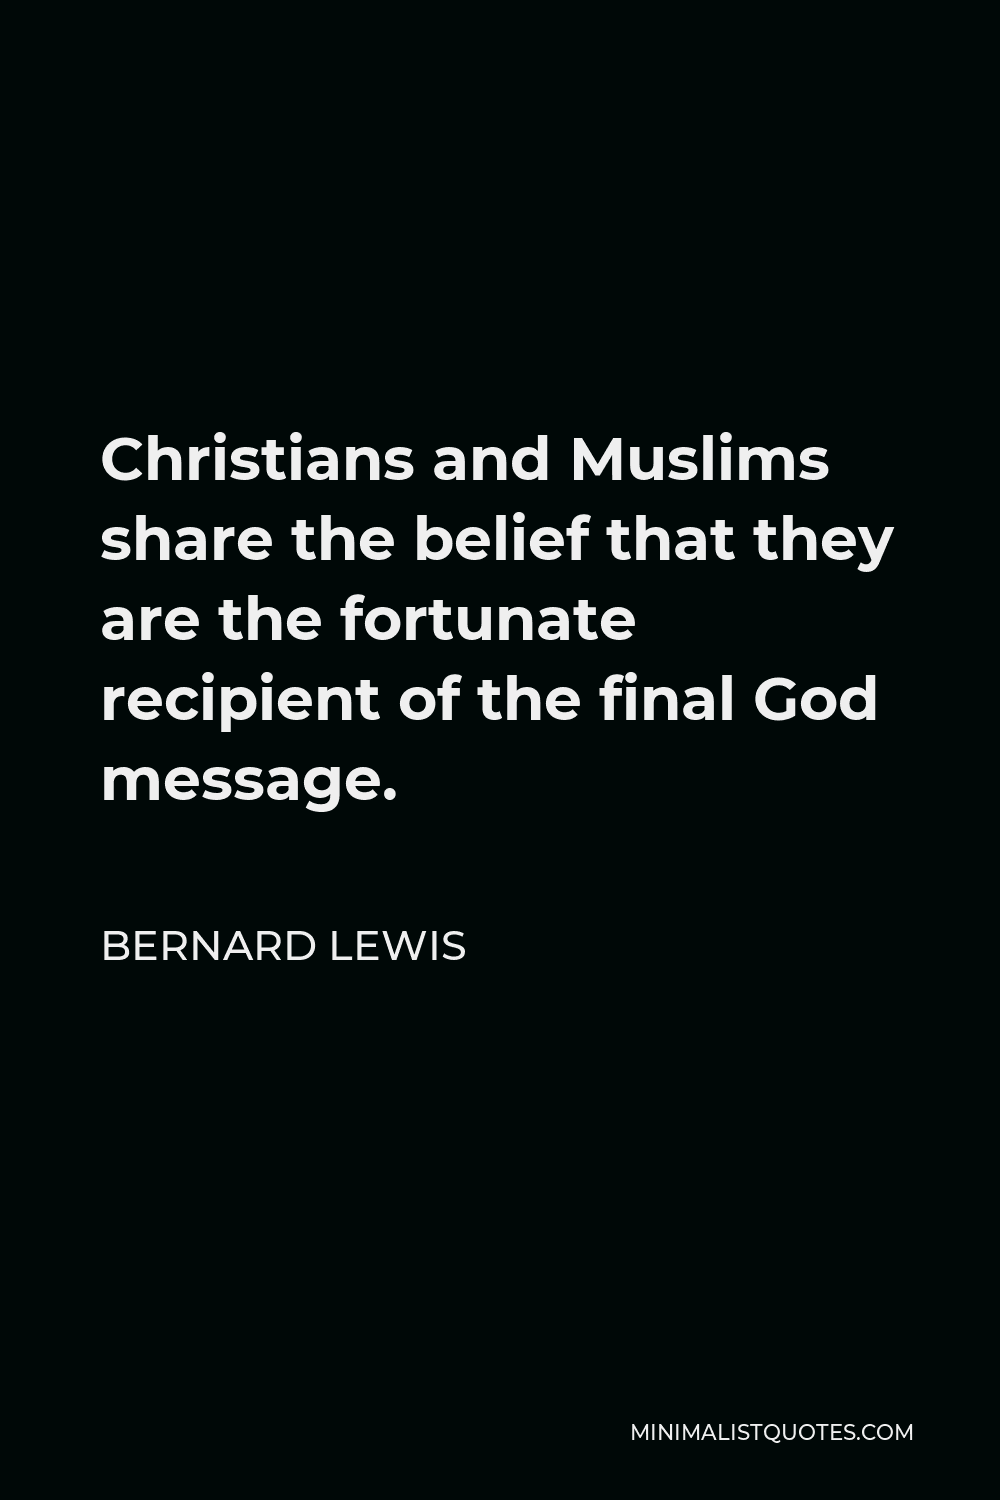 Bernard Lewis Quote - Christians and Muslims share the belief that they are the fortunate recipient of the final God message.